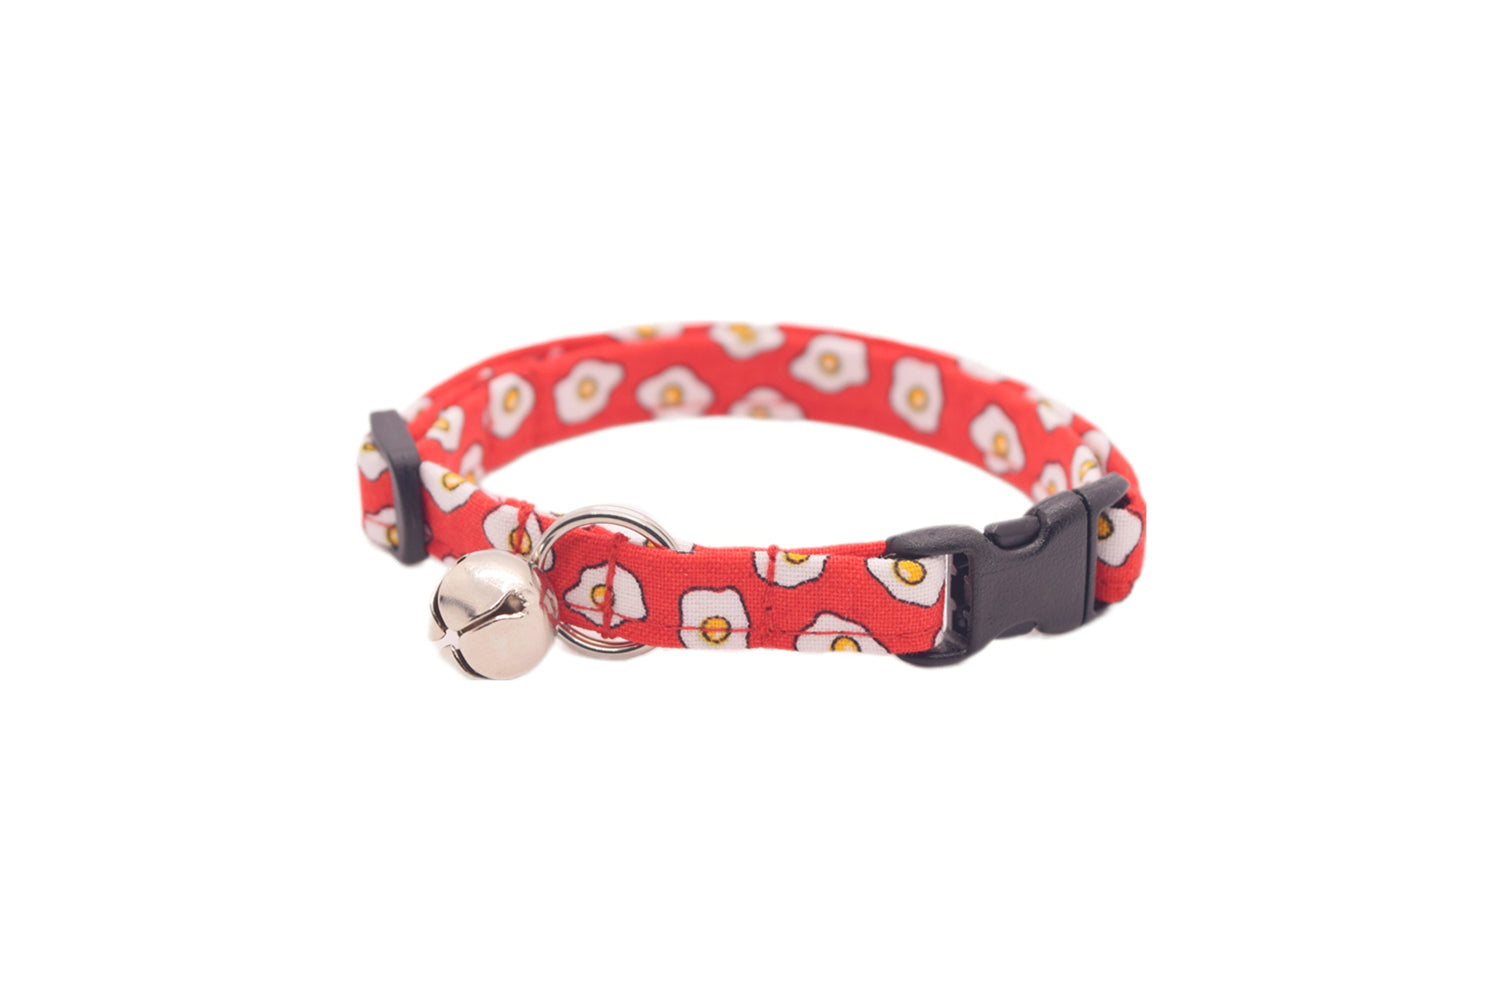 Egg Cat Collar - Red with Fried Eggs - Funny Food Pattern Breakaway Cat Collar - Handmade by Kira's Pet Shop